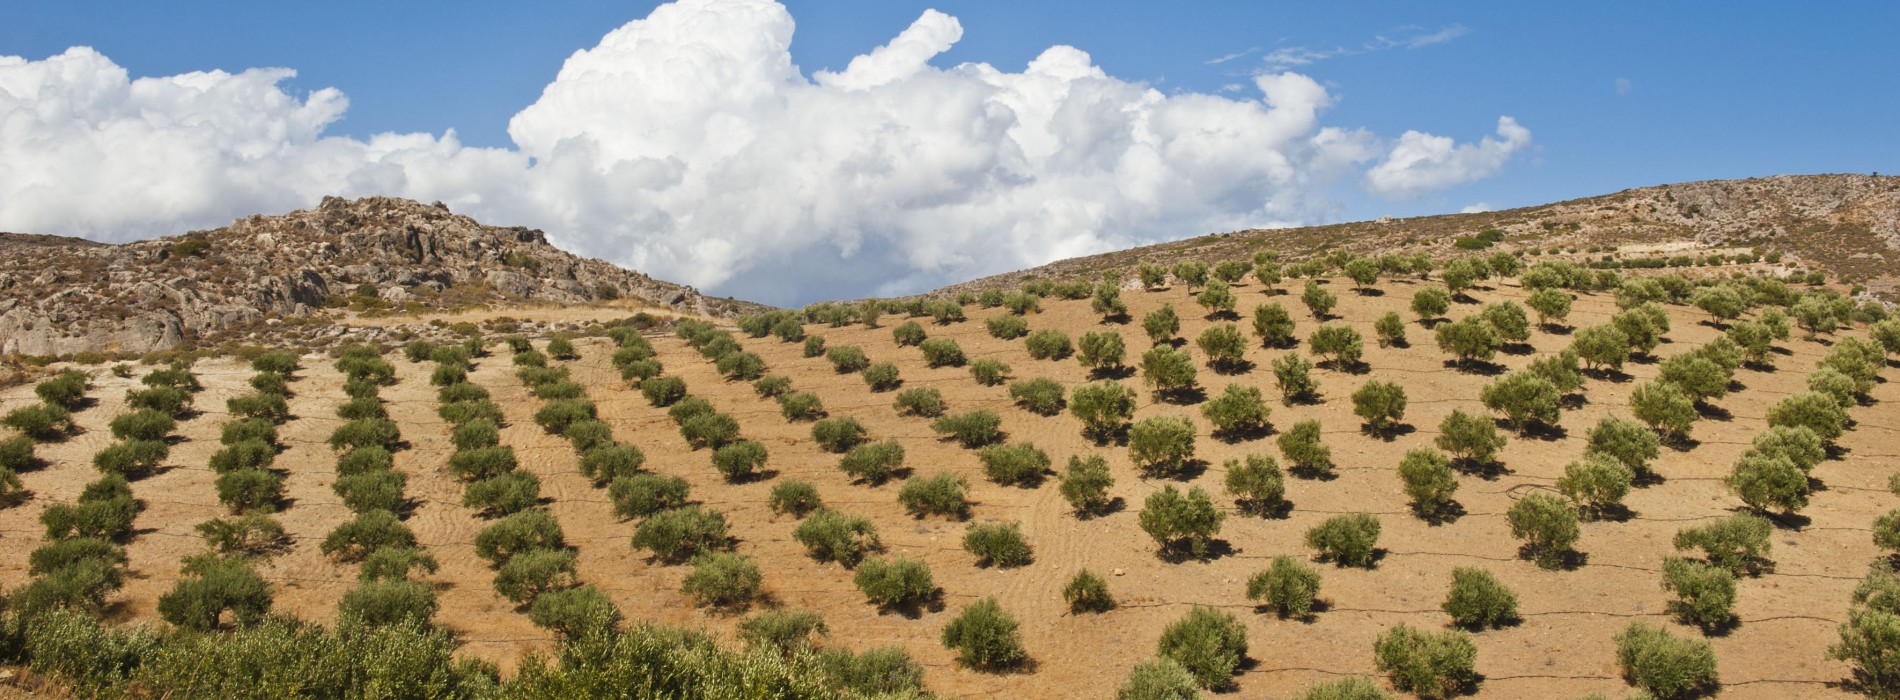 Experience the Greece countryside with Olive harvesting season